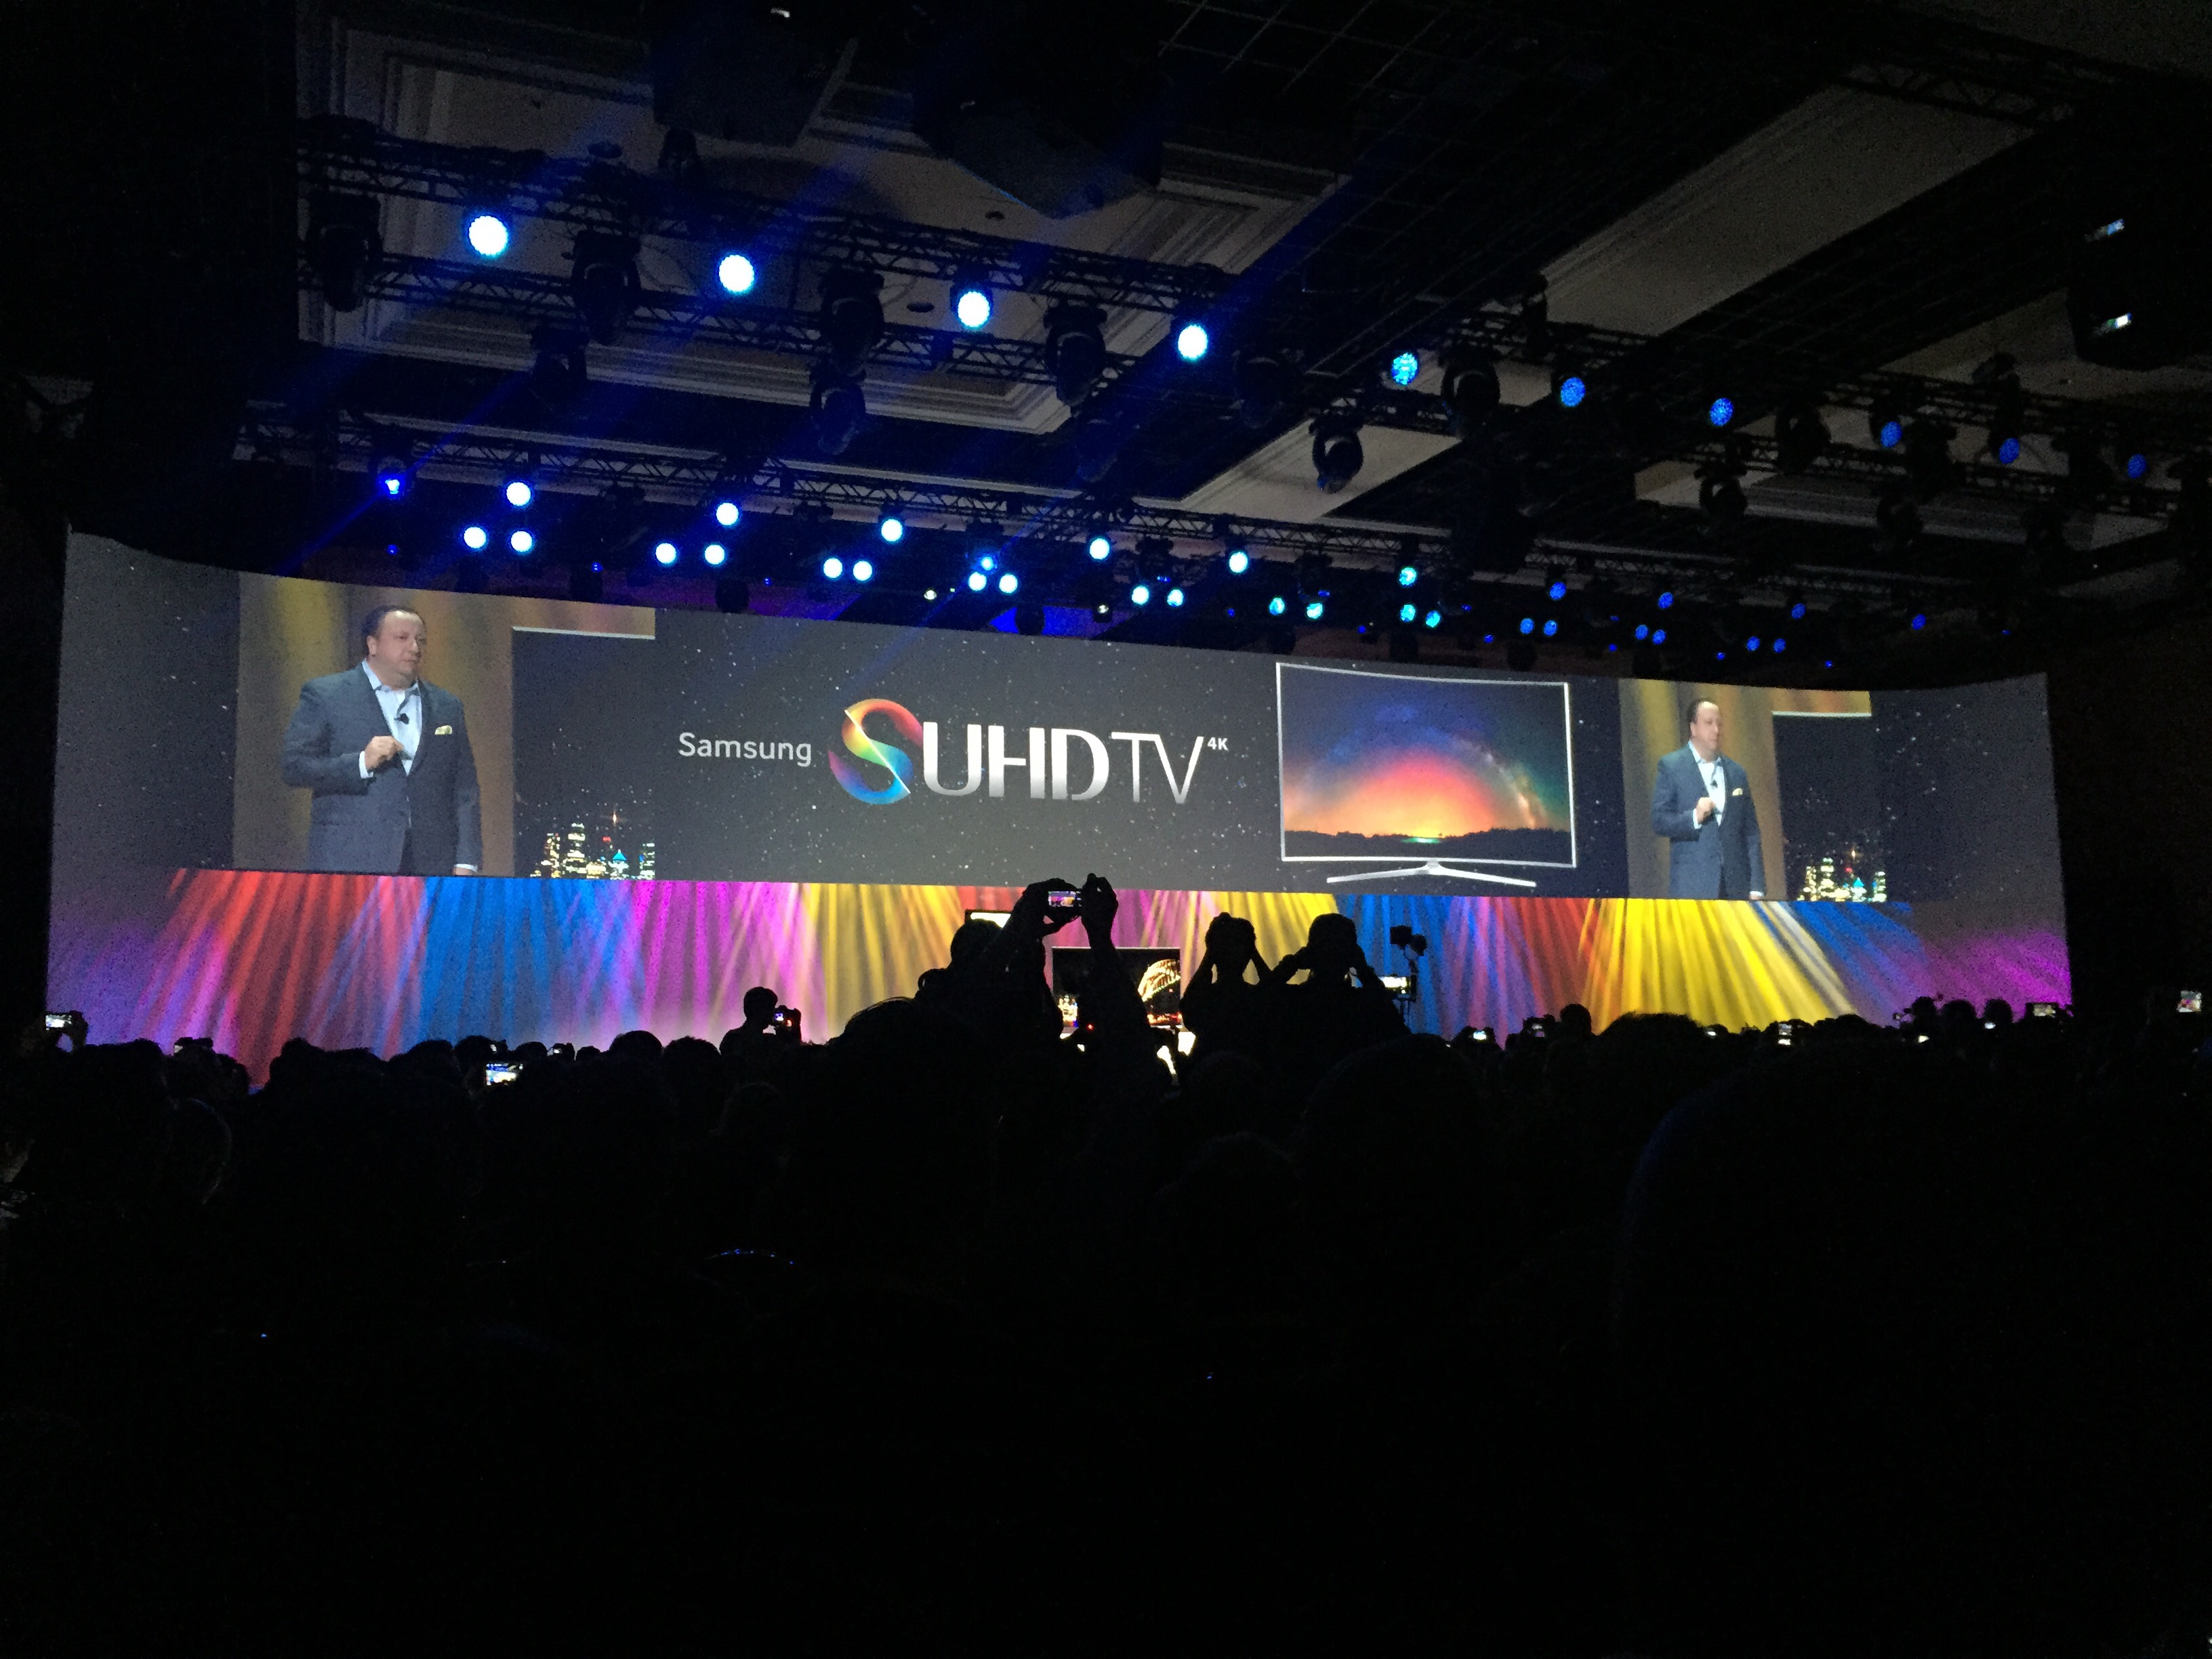 Samsung's SUHD TV at CES 2015 press conference